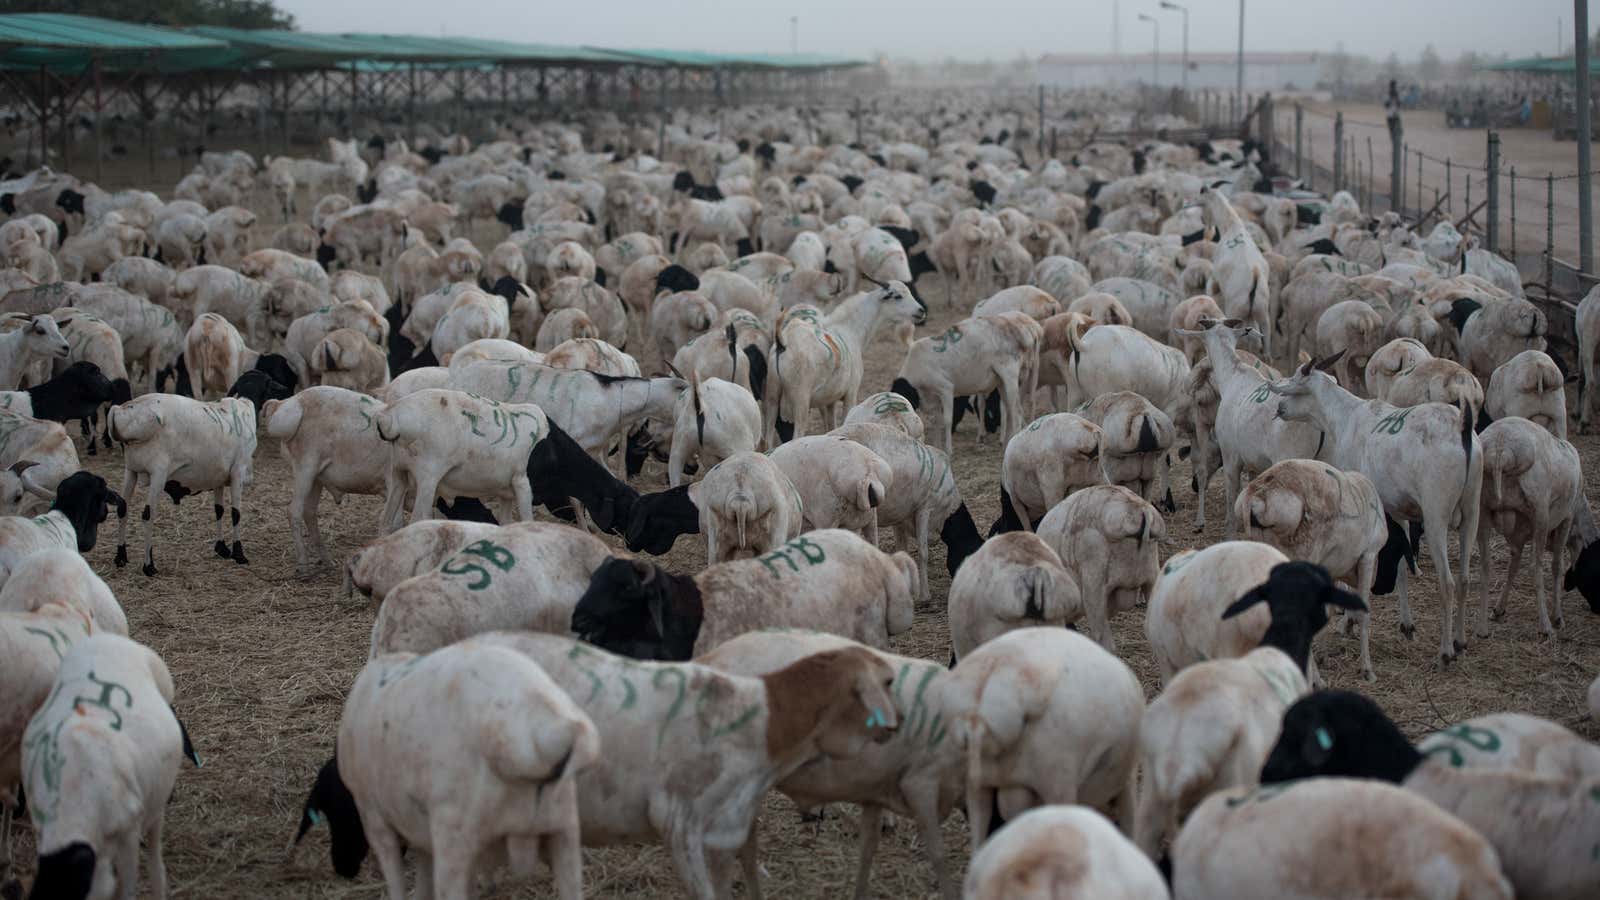 Some of nearly a million goats and sheep wait at the Berbera port in Somaliland, before being shipped to Saudi Arabia for the Hajj.